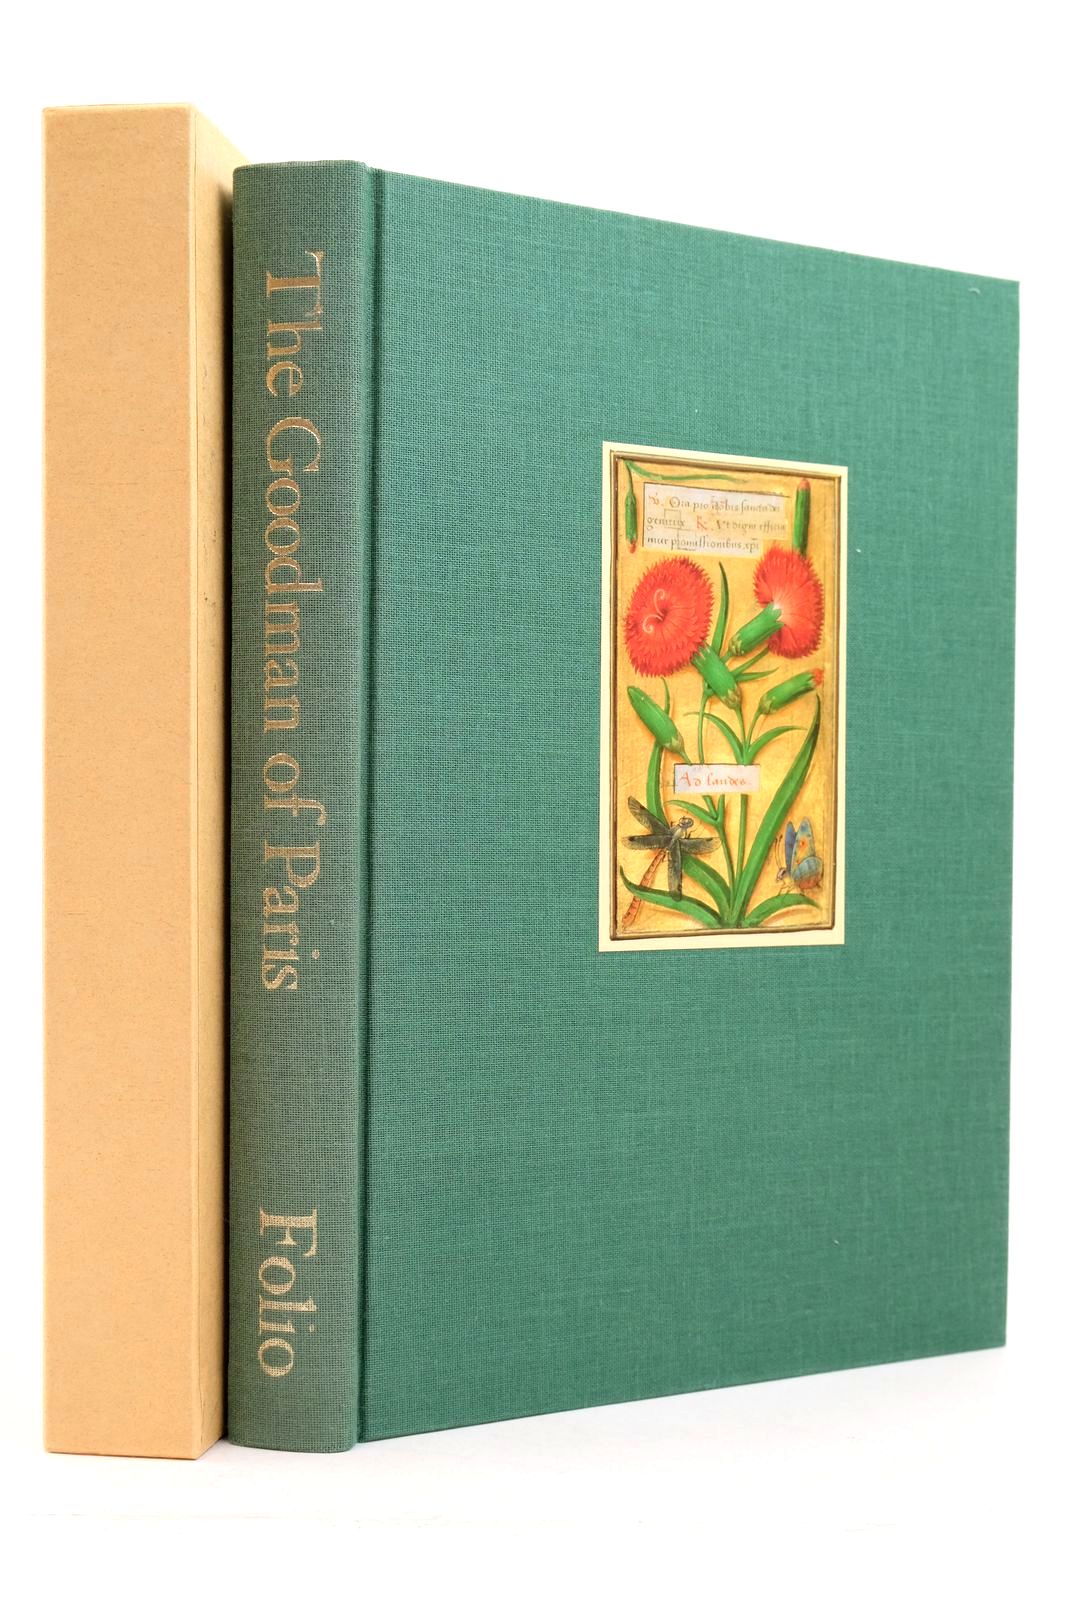 Photo of THE GOODMAN OF PARIS written by Power, Eileen published by Folio Society (STOCK CODE: 2138956)  for sale by Stella & Rose's Books